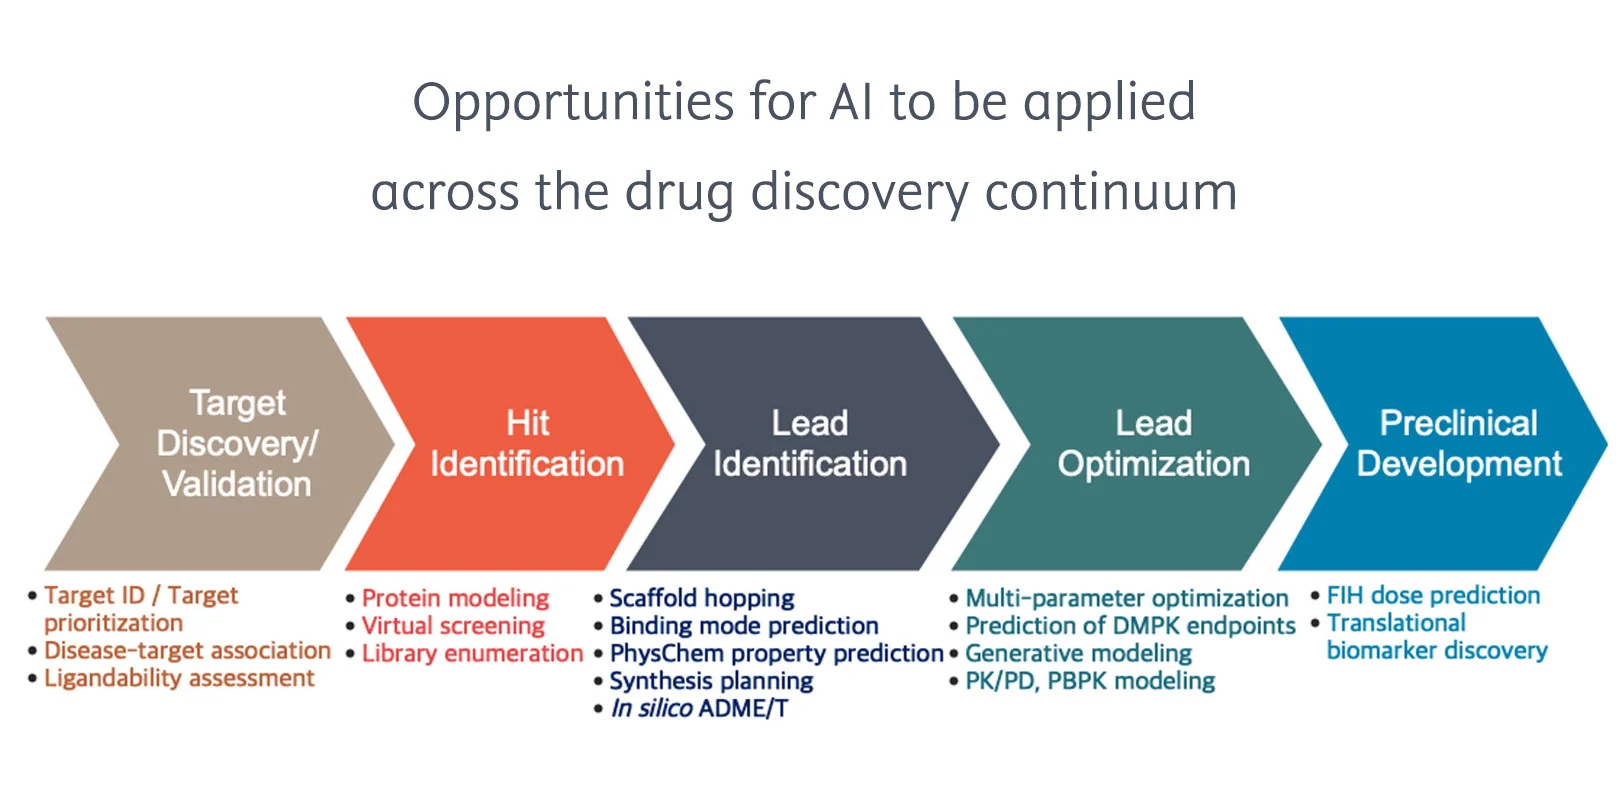 Schematic representation of the preclinical drug discovery process highlighting opportunities for AI to be applied across the drug discovery continuum.